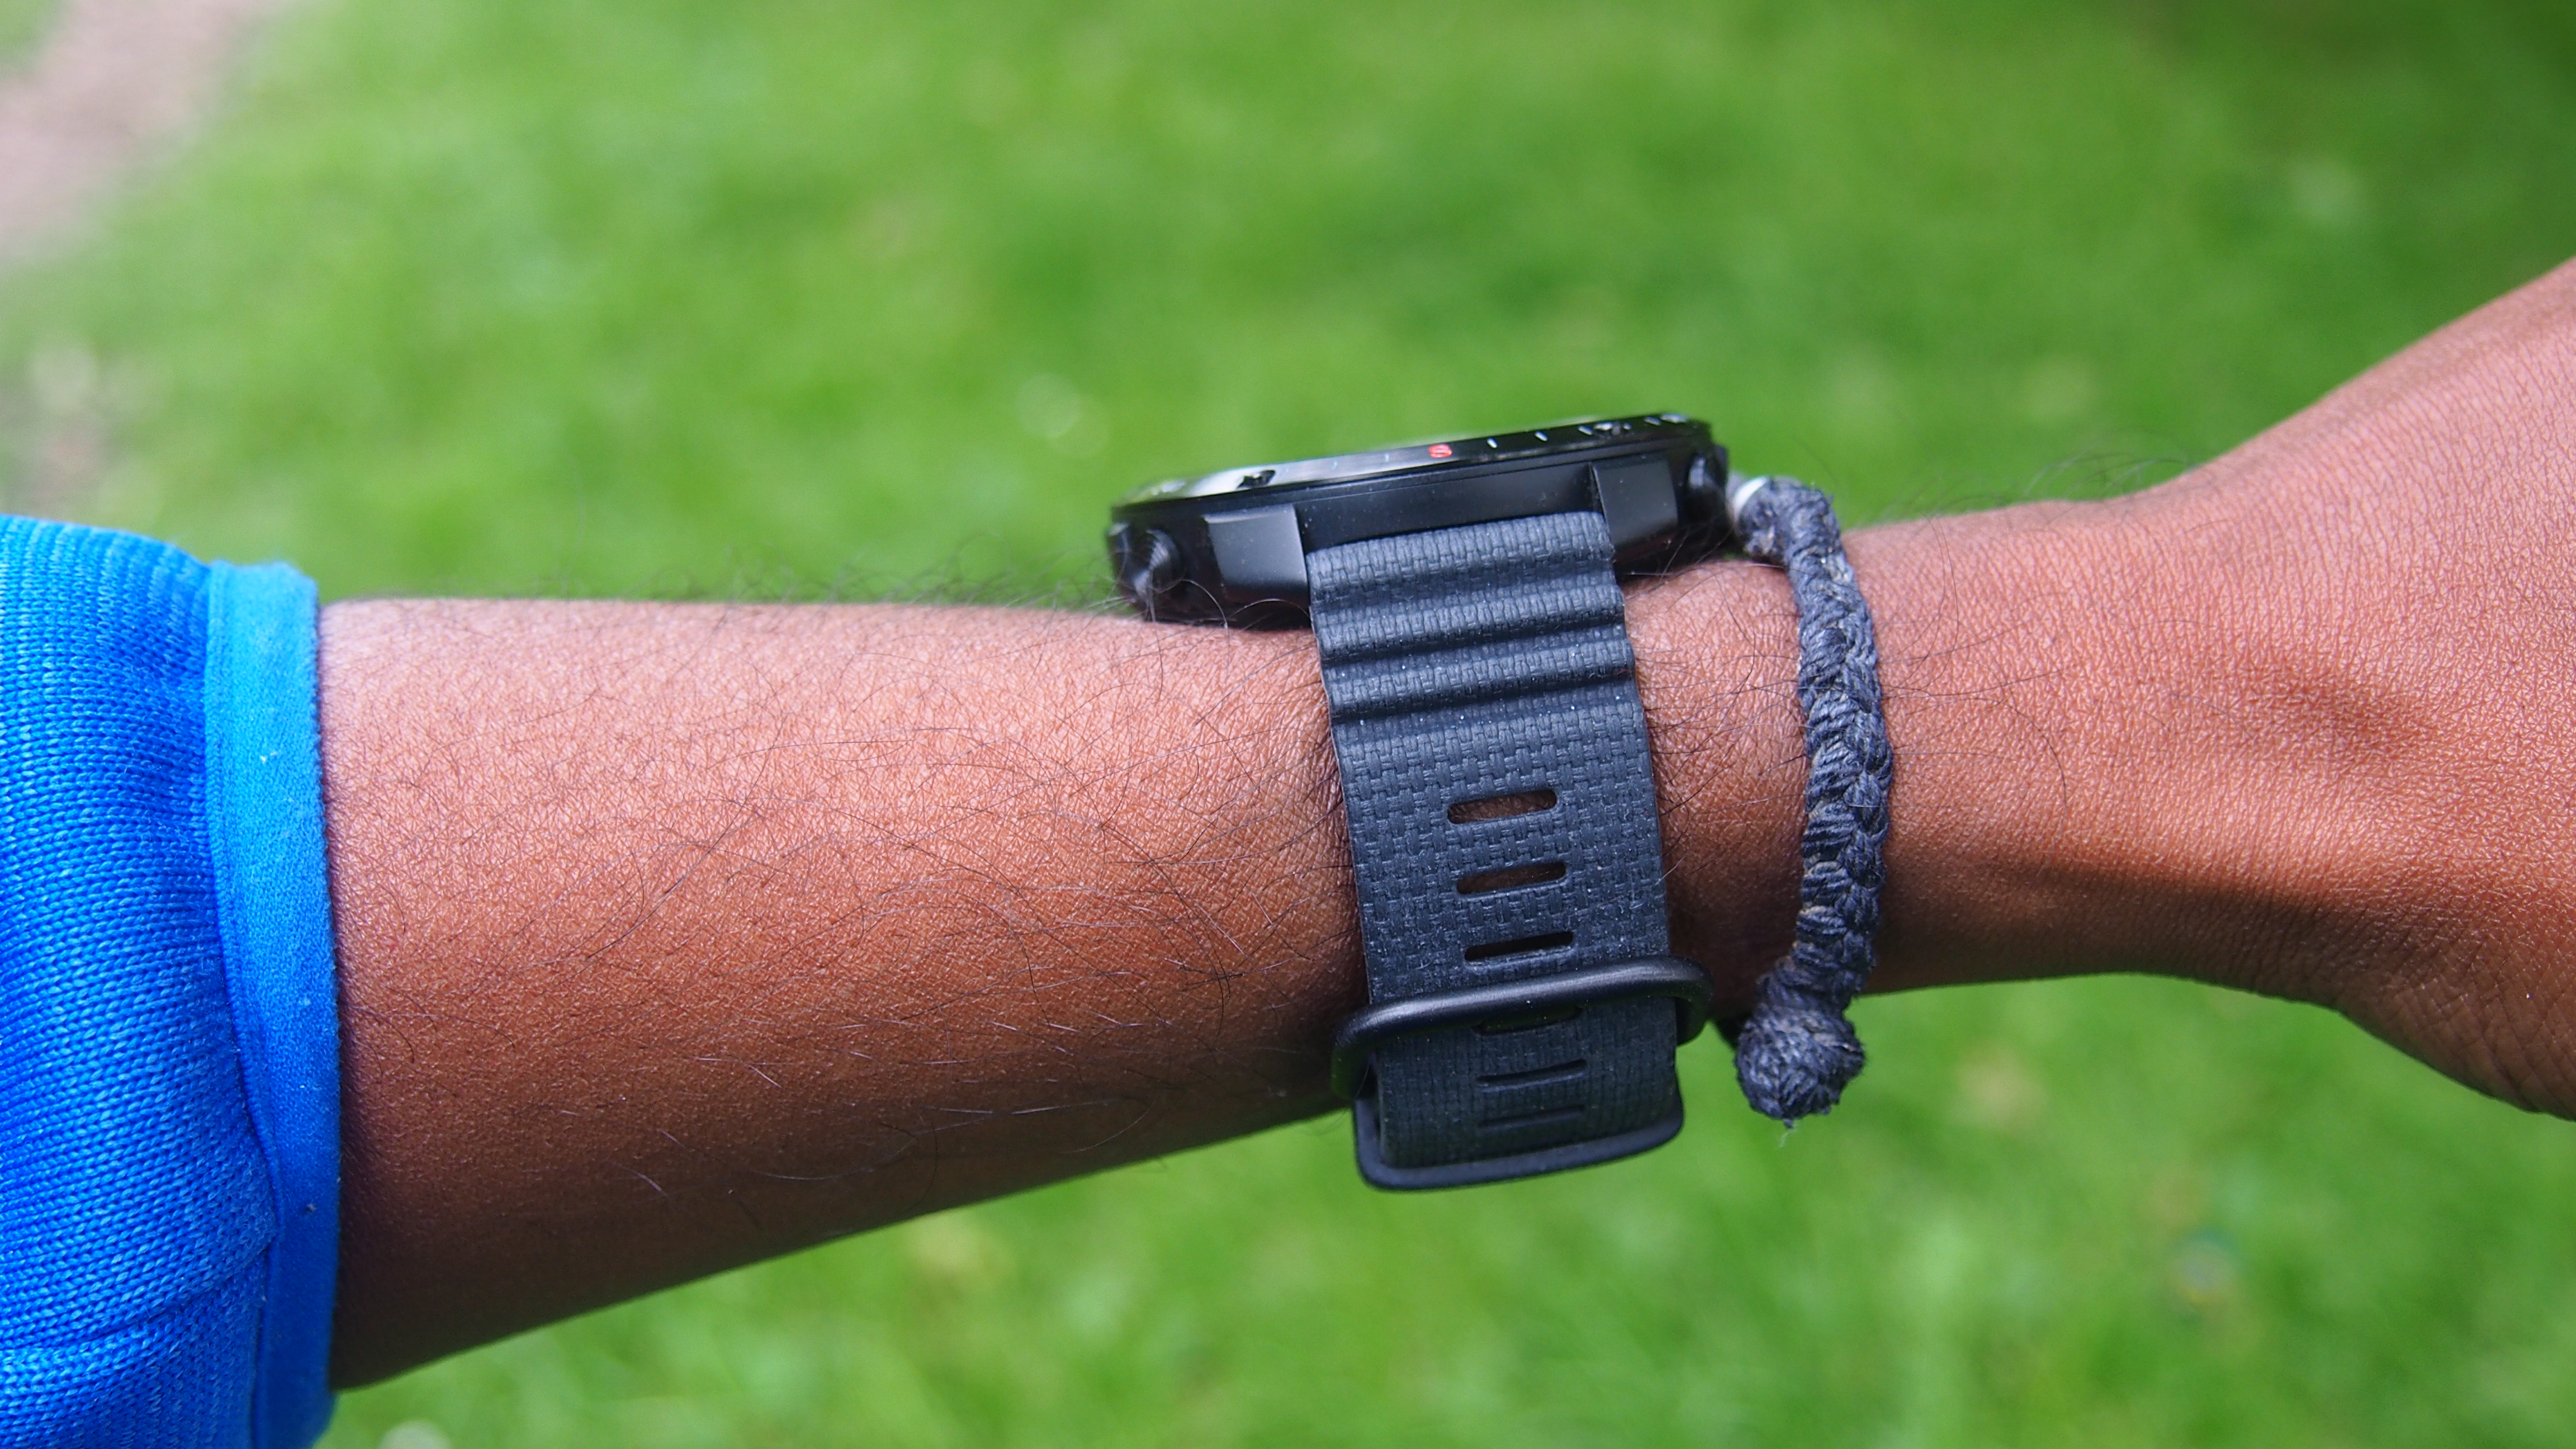 Polar Grit X2 Pro watch on the wrist showing bezel thickness